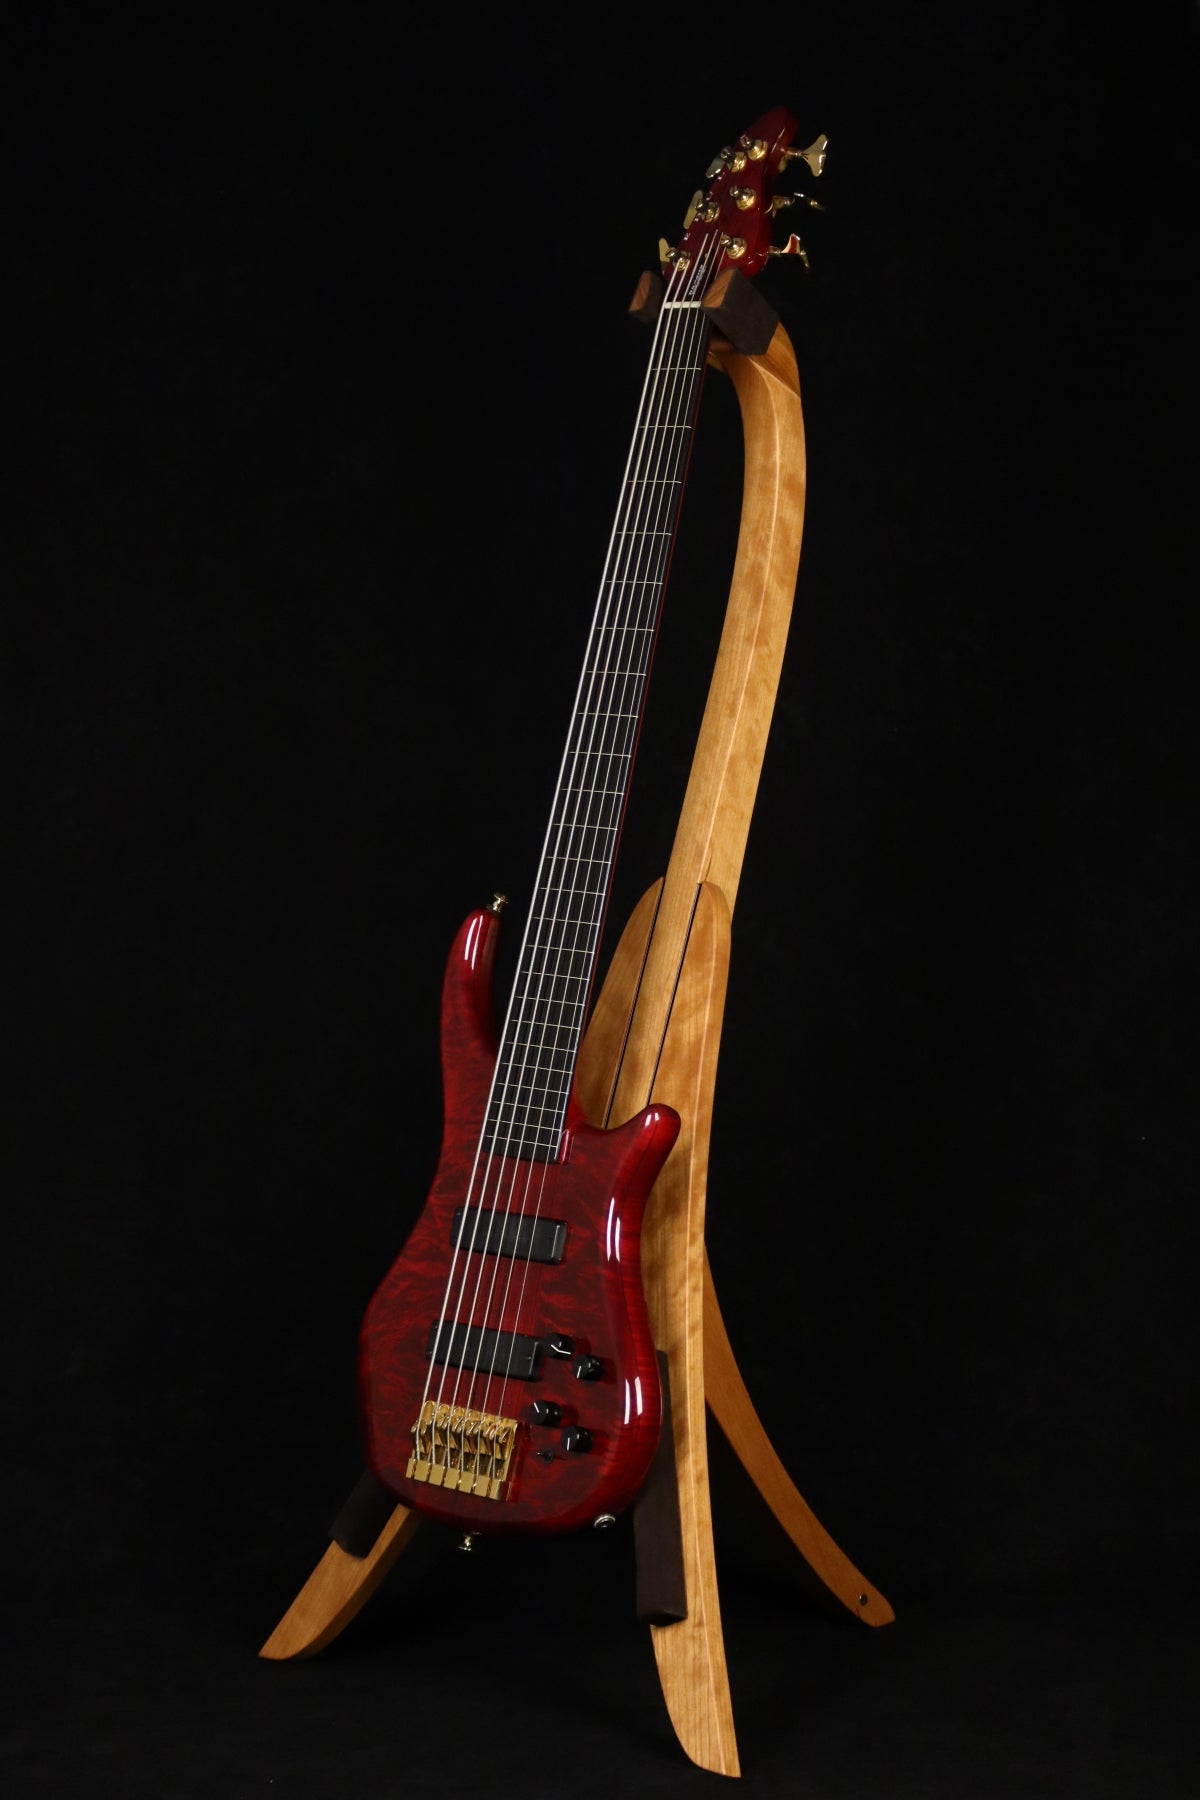 Folding cherry wood electric bass guitar floor stand full front image with Pedulla 6 string fretless bass